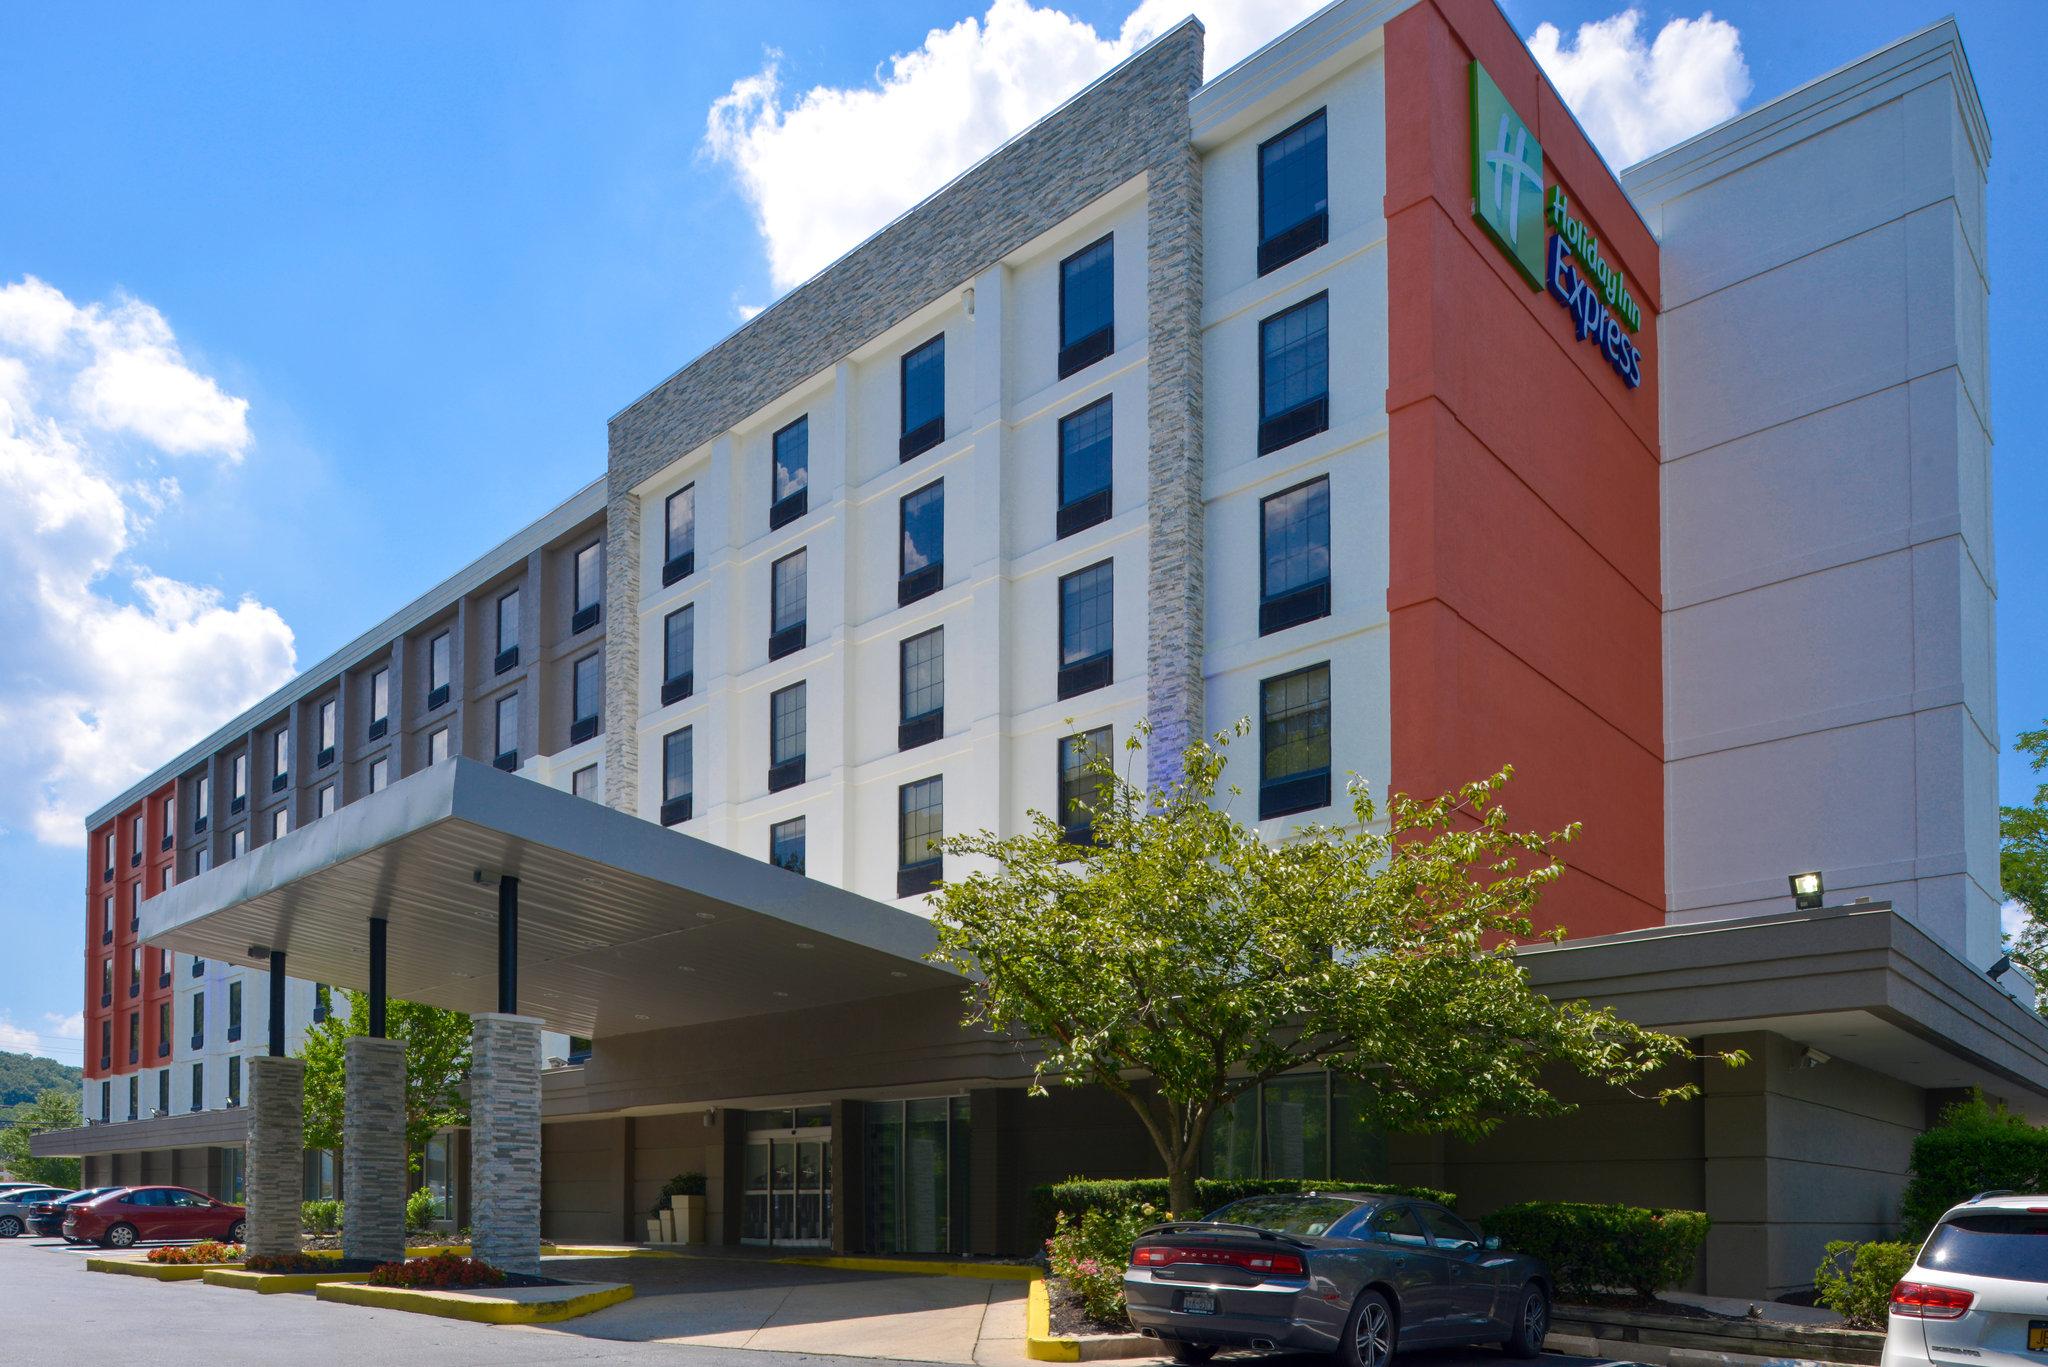 Holiday Inn Express Towson Baltimore N in Towson, MD